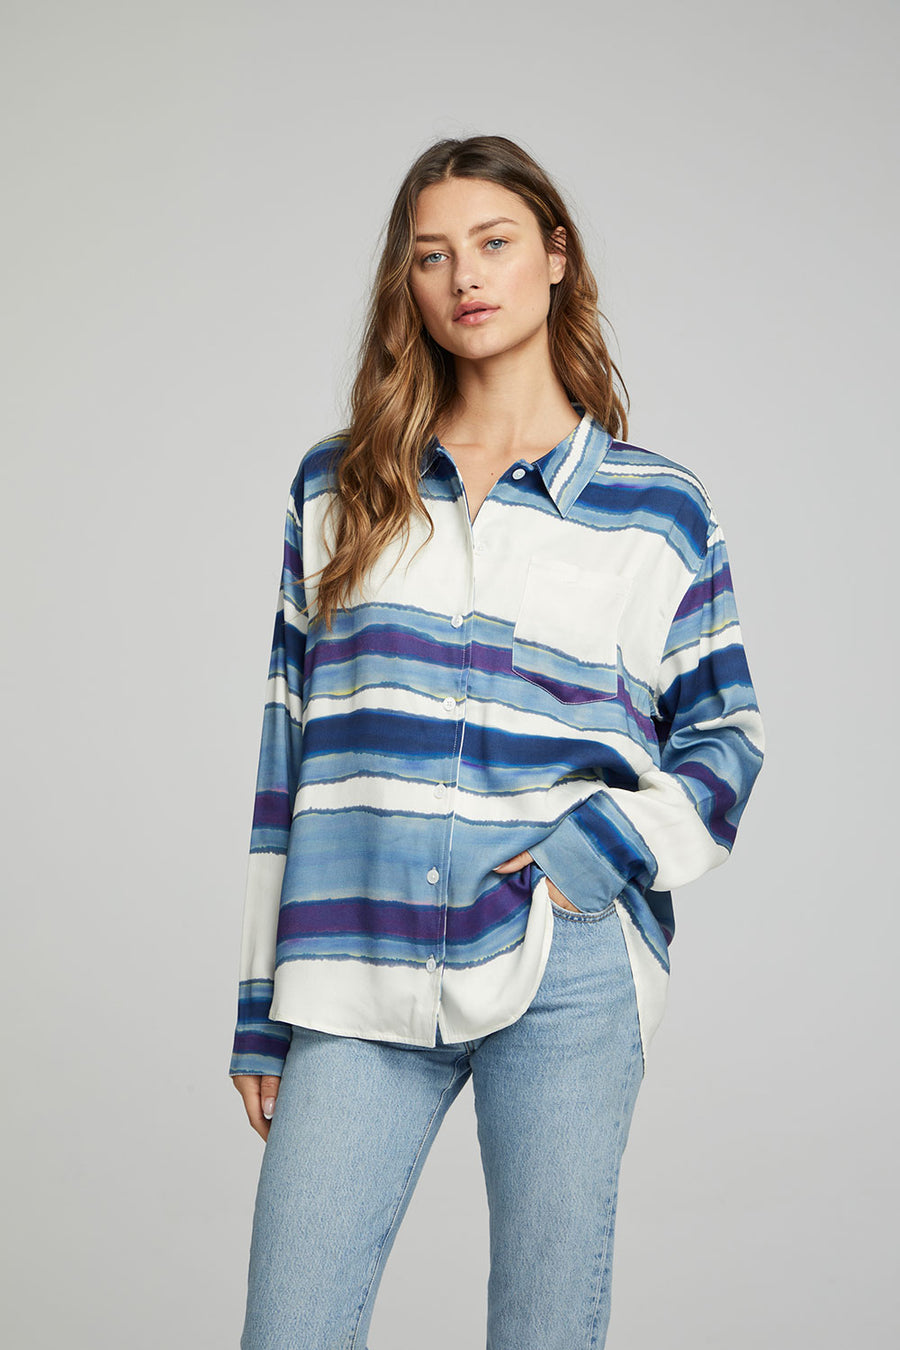 Saville Button Down - Pacific Stripe WOMENS chaserbrand